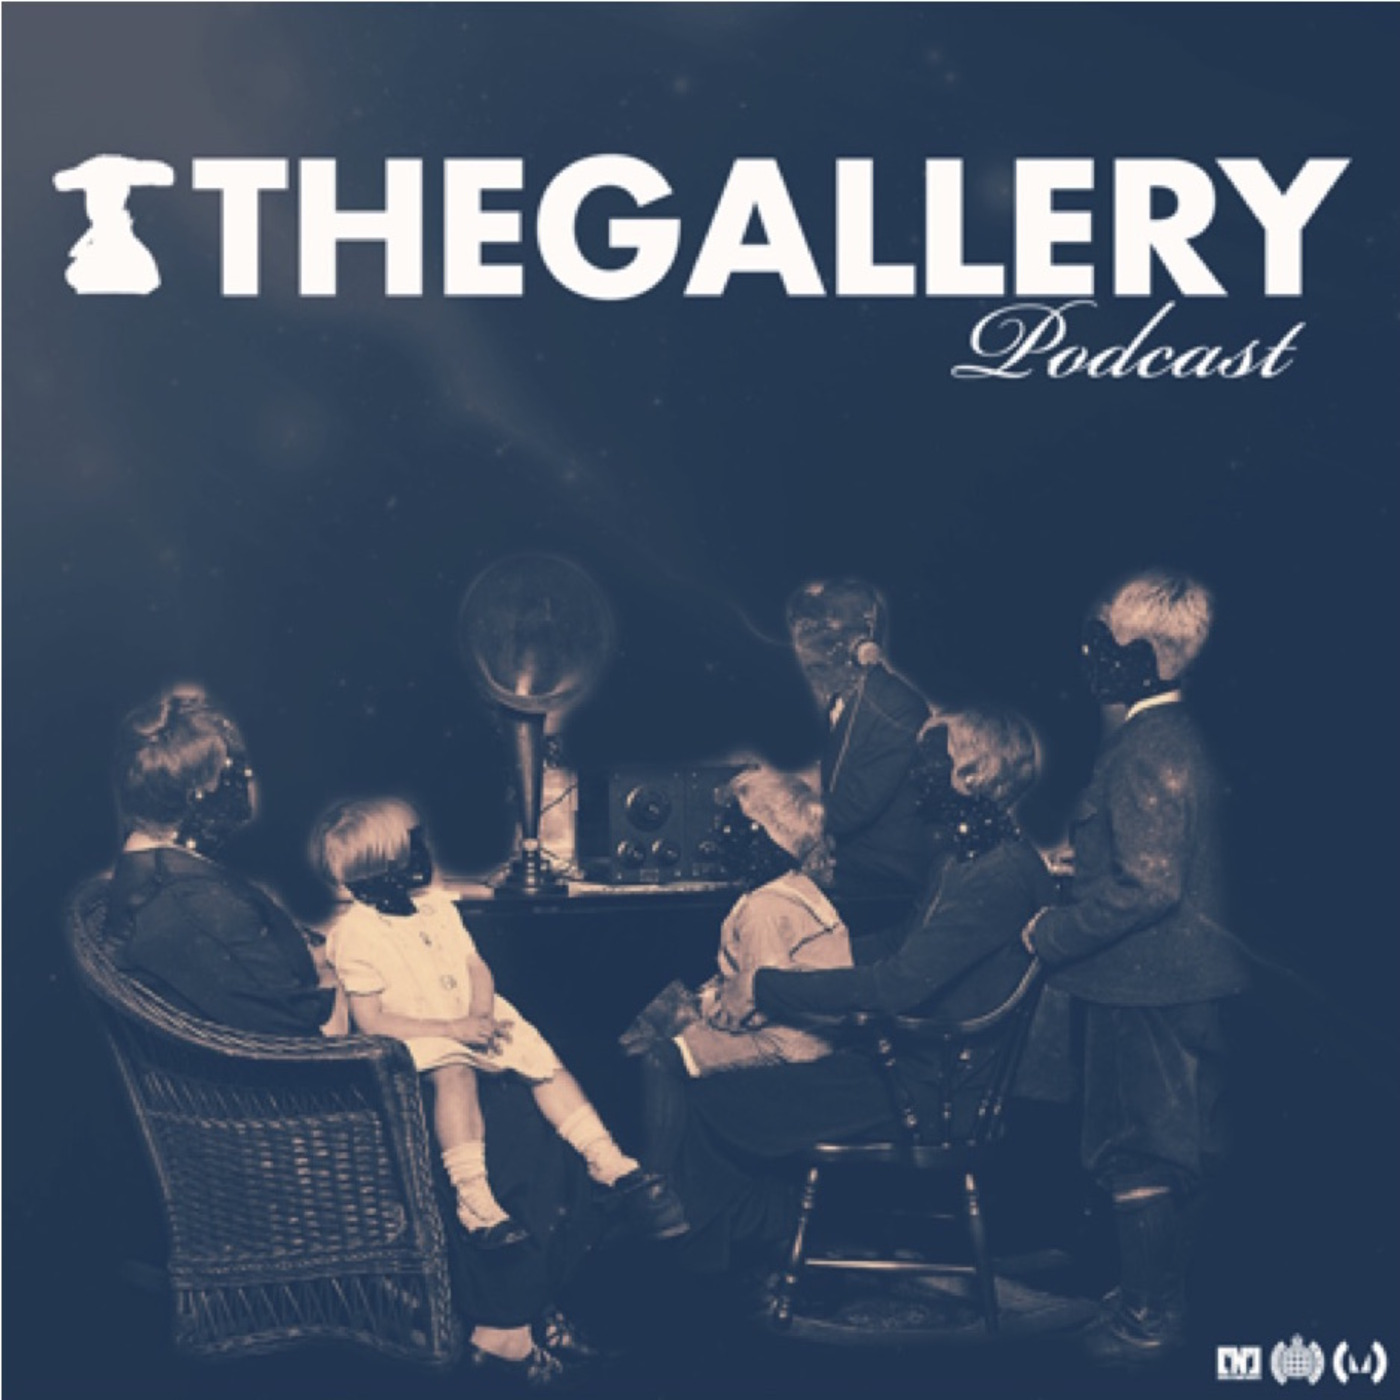 The Gallery Podcast Episode 169 W/ Tristan D + Mike Williams Guest Mix